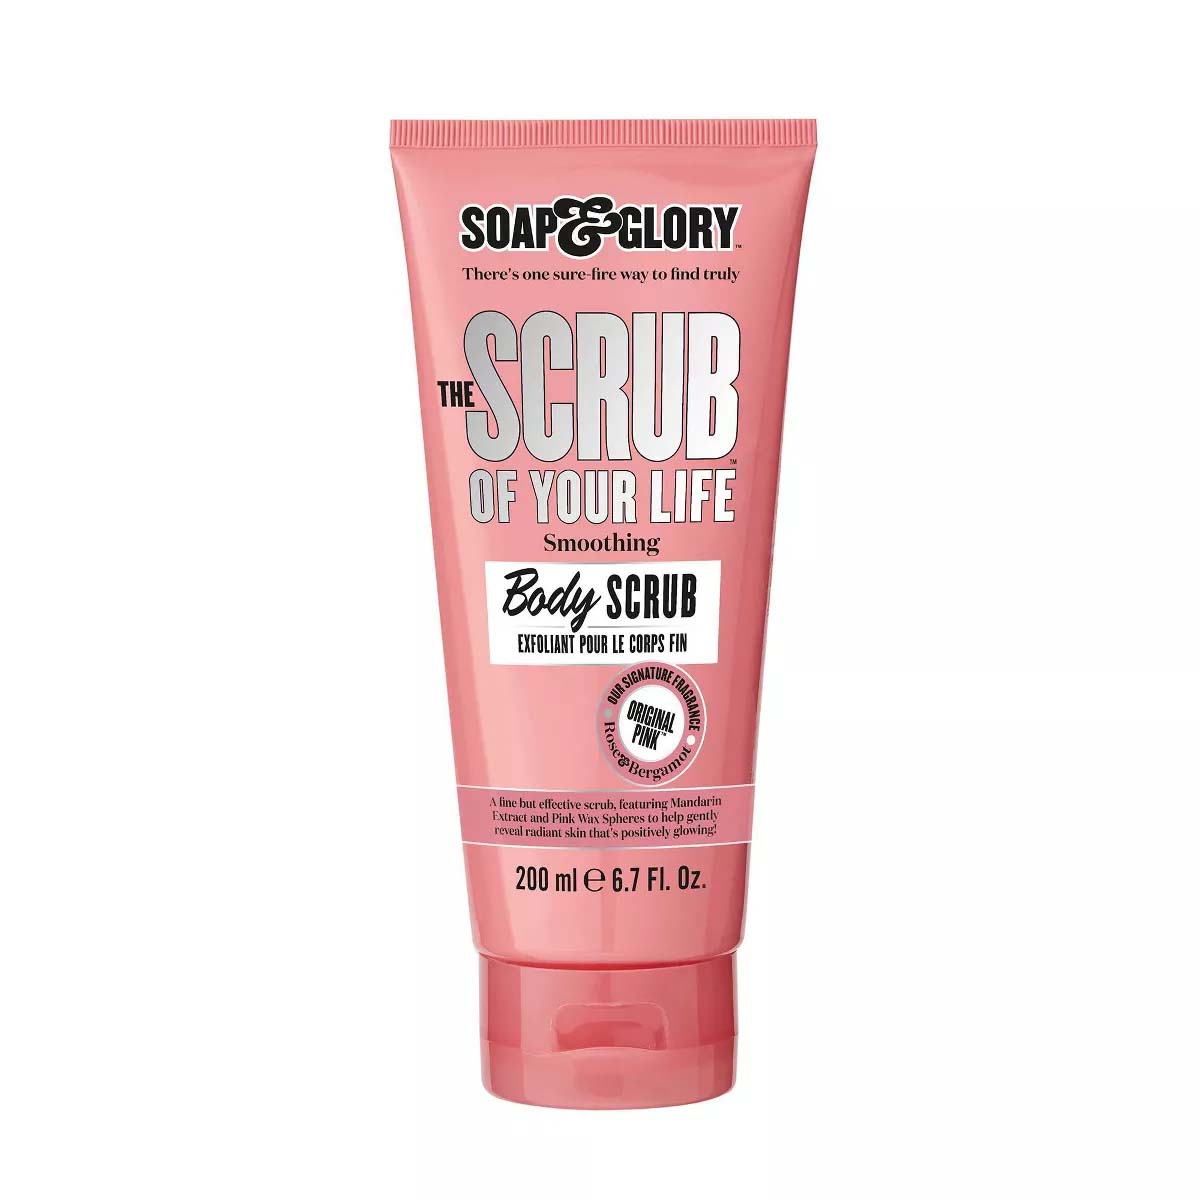 pink bottle of Soap & Glory The Scrub Of Your Life Body Scrub - Original Pink Scent 